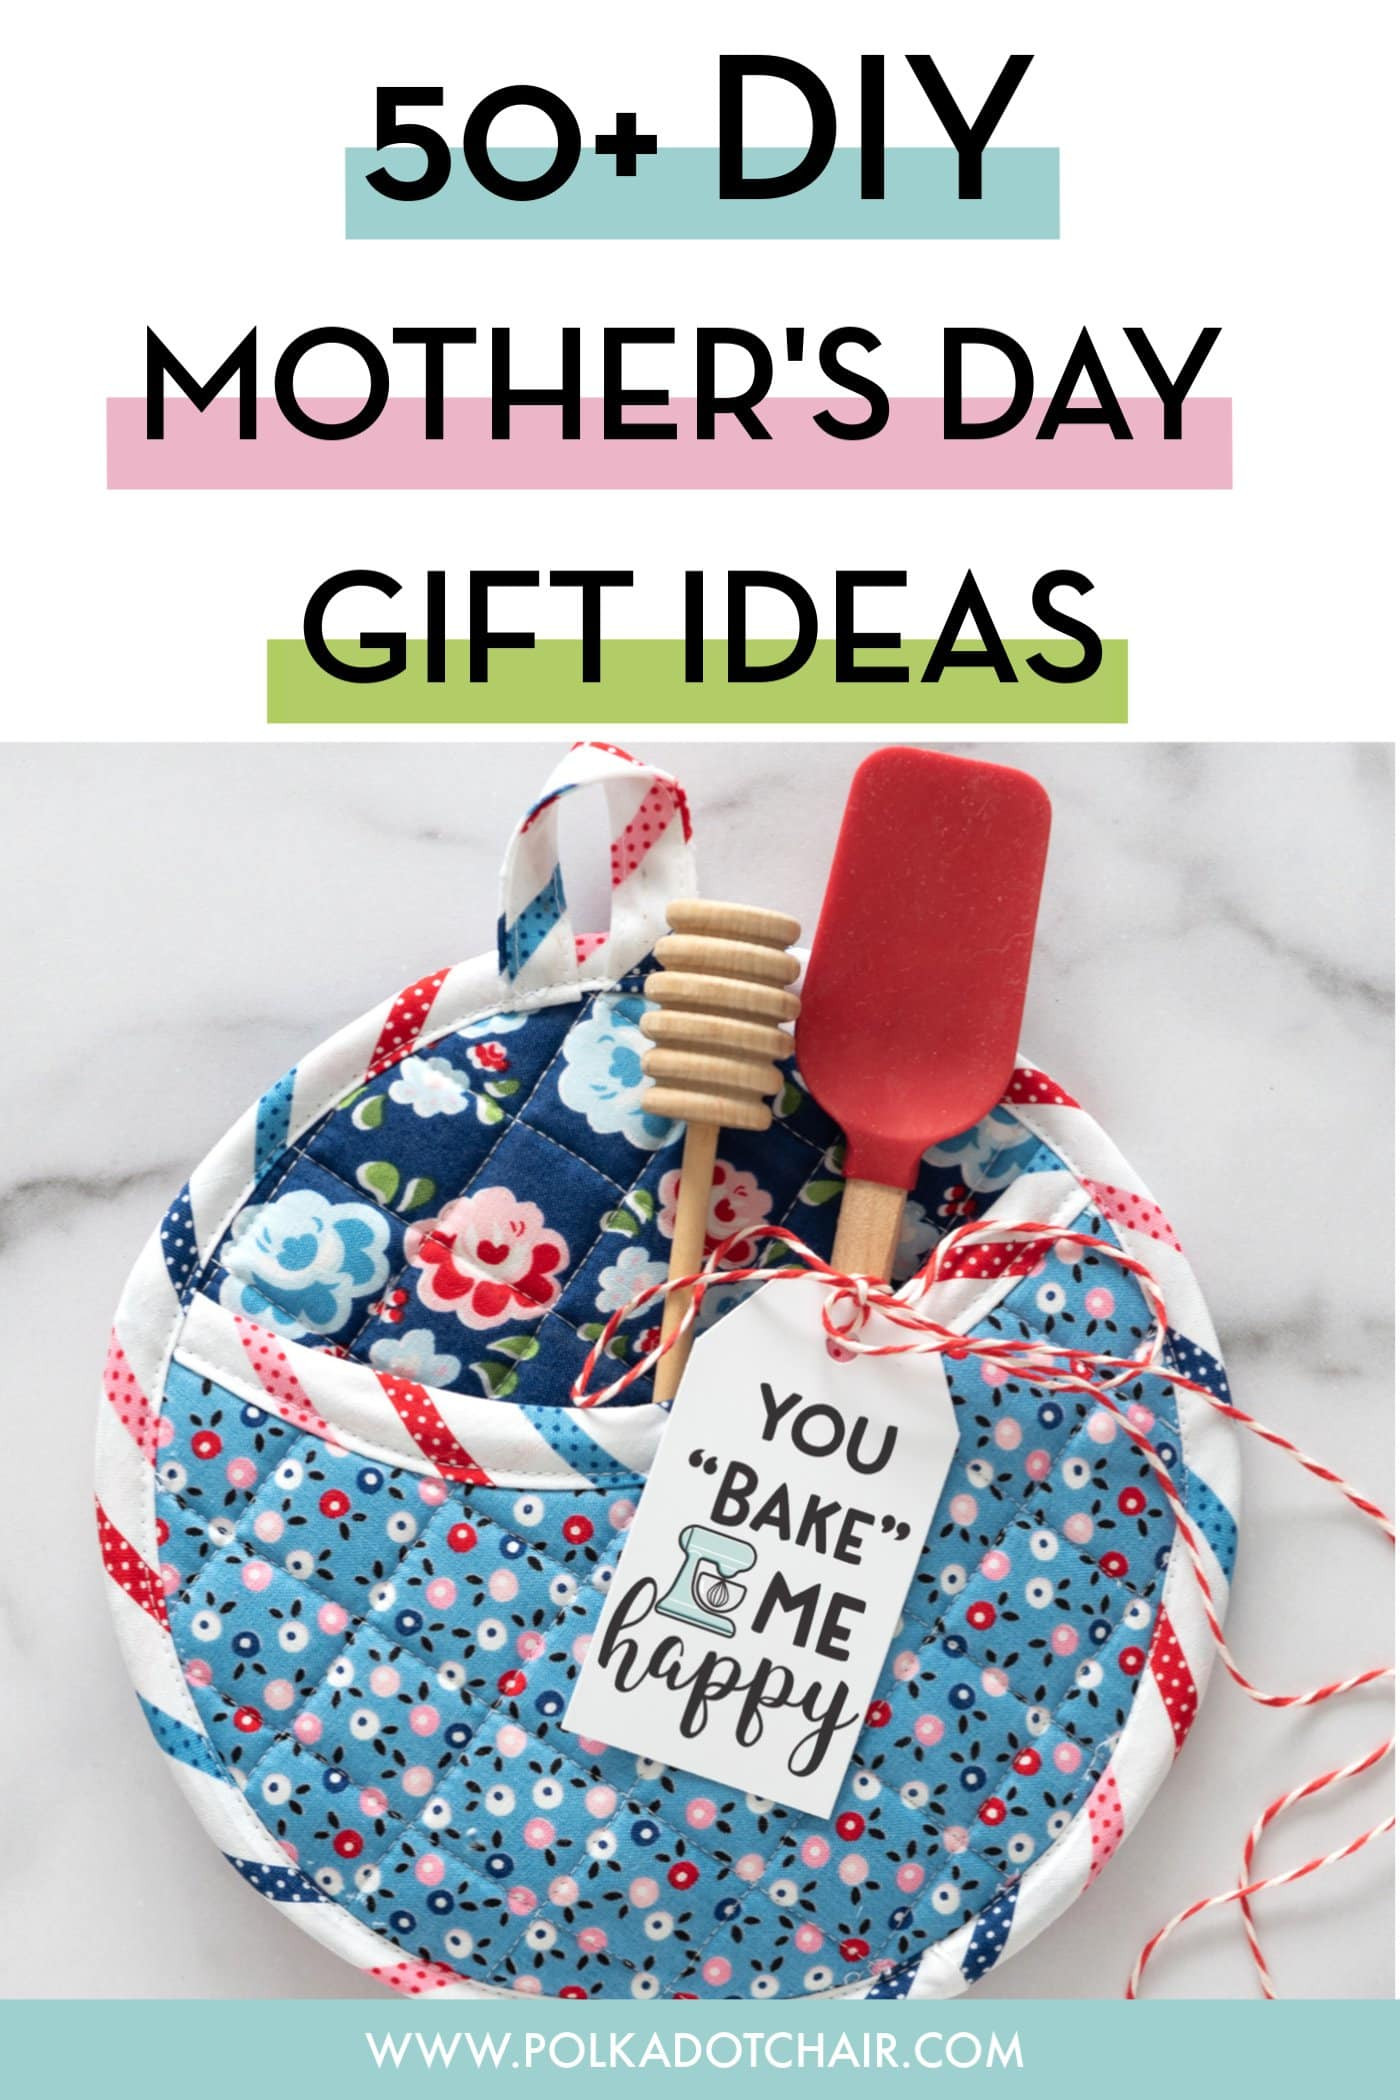 Mothers Days Gift Ideas
 50 DIY Mother s Day Gift Ideas & Projects